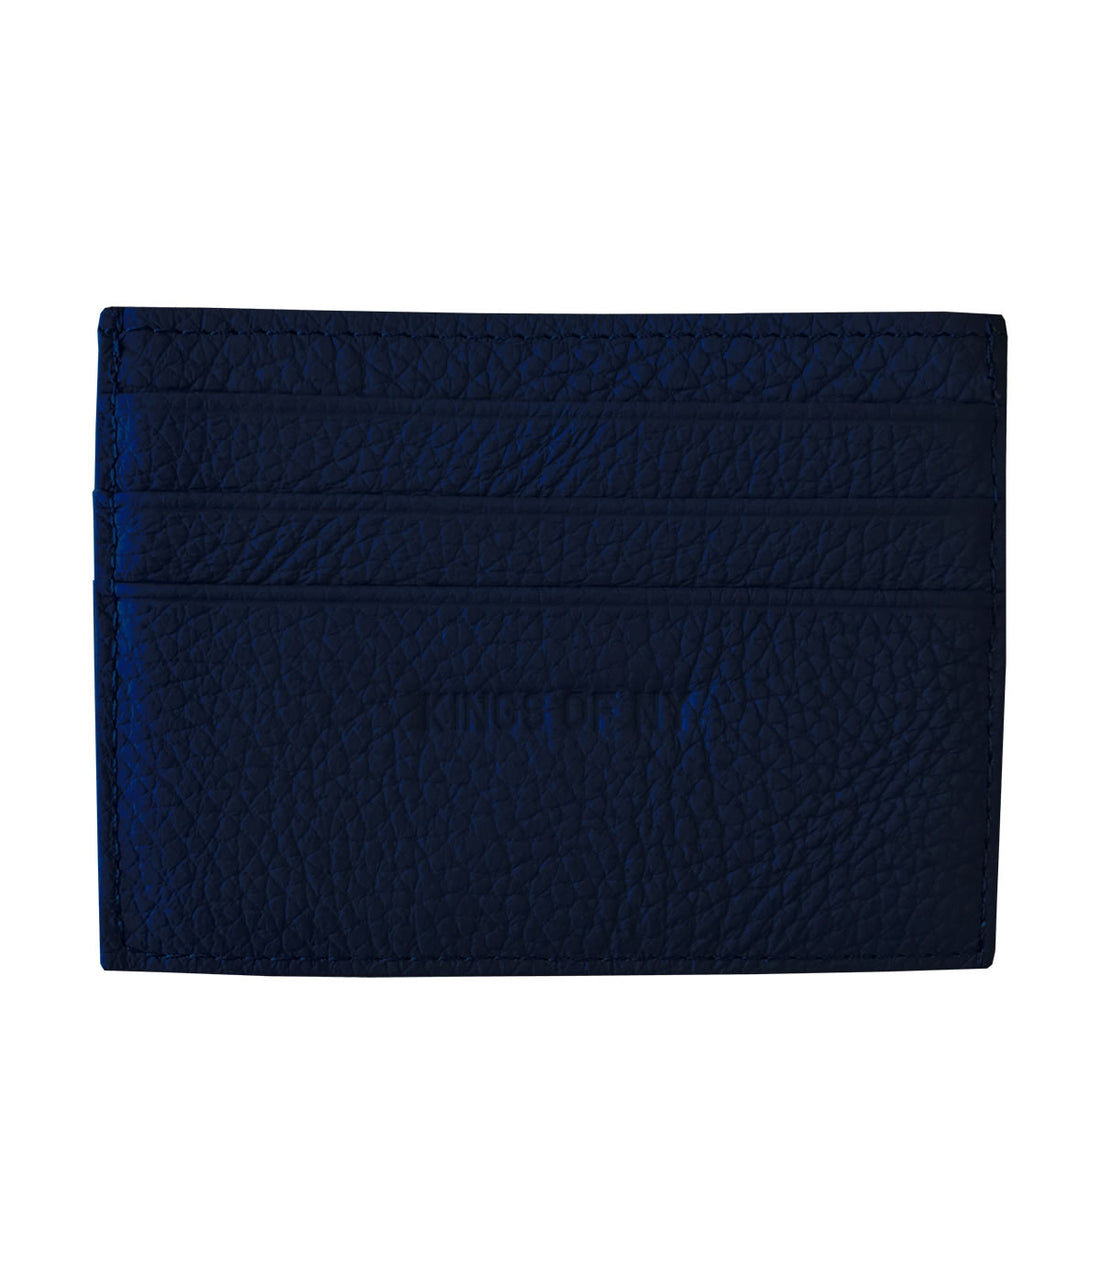 Kings Of NY Pebble Leather Card Holder Wallet Navy Blue